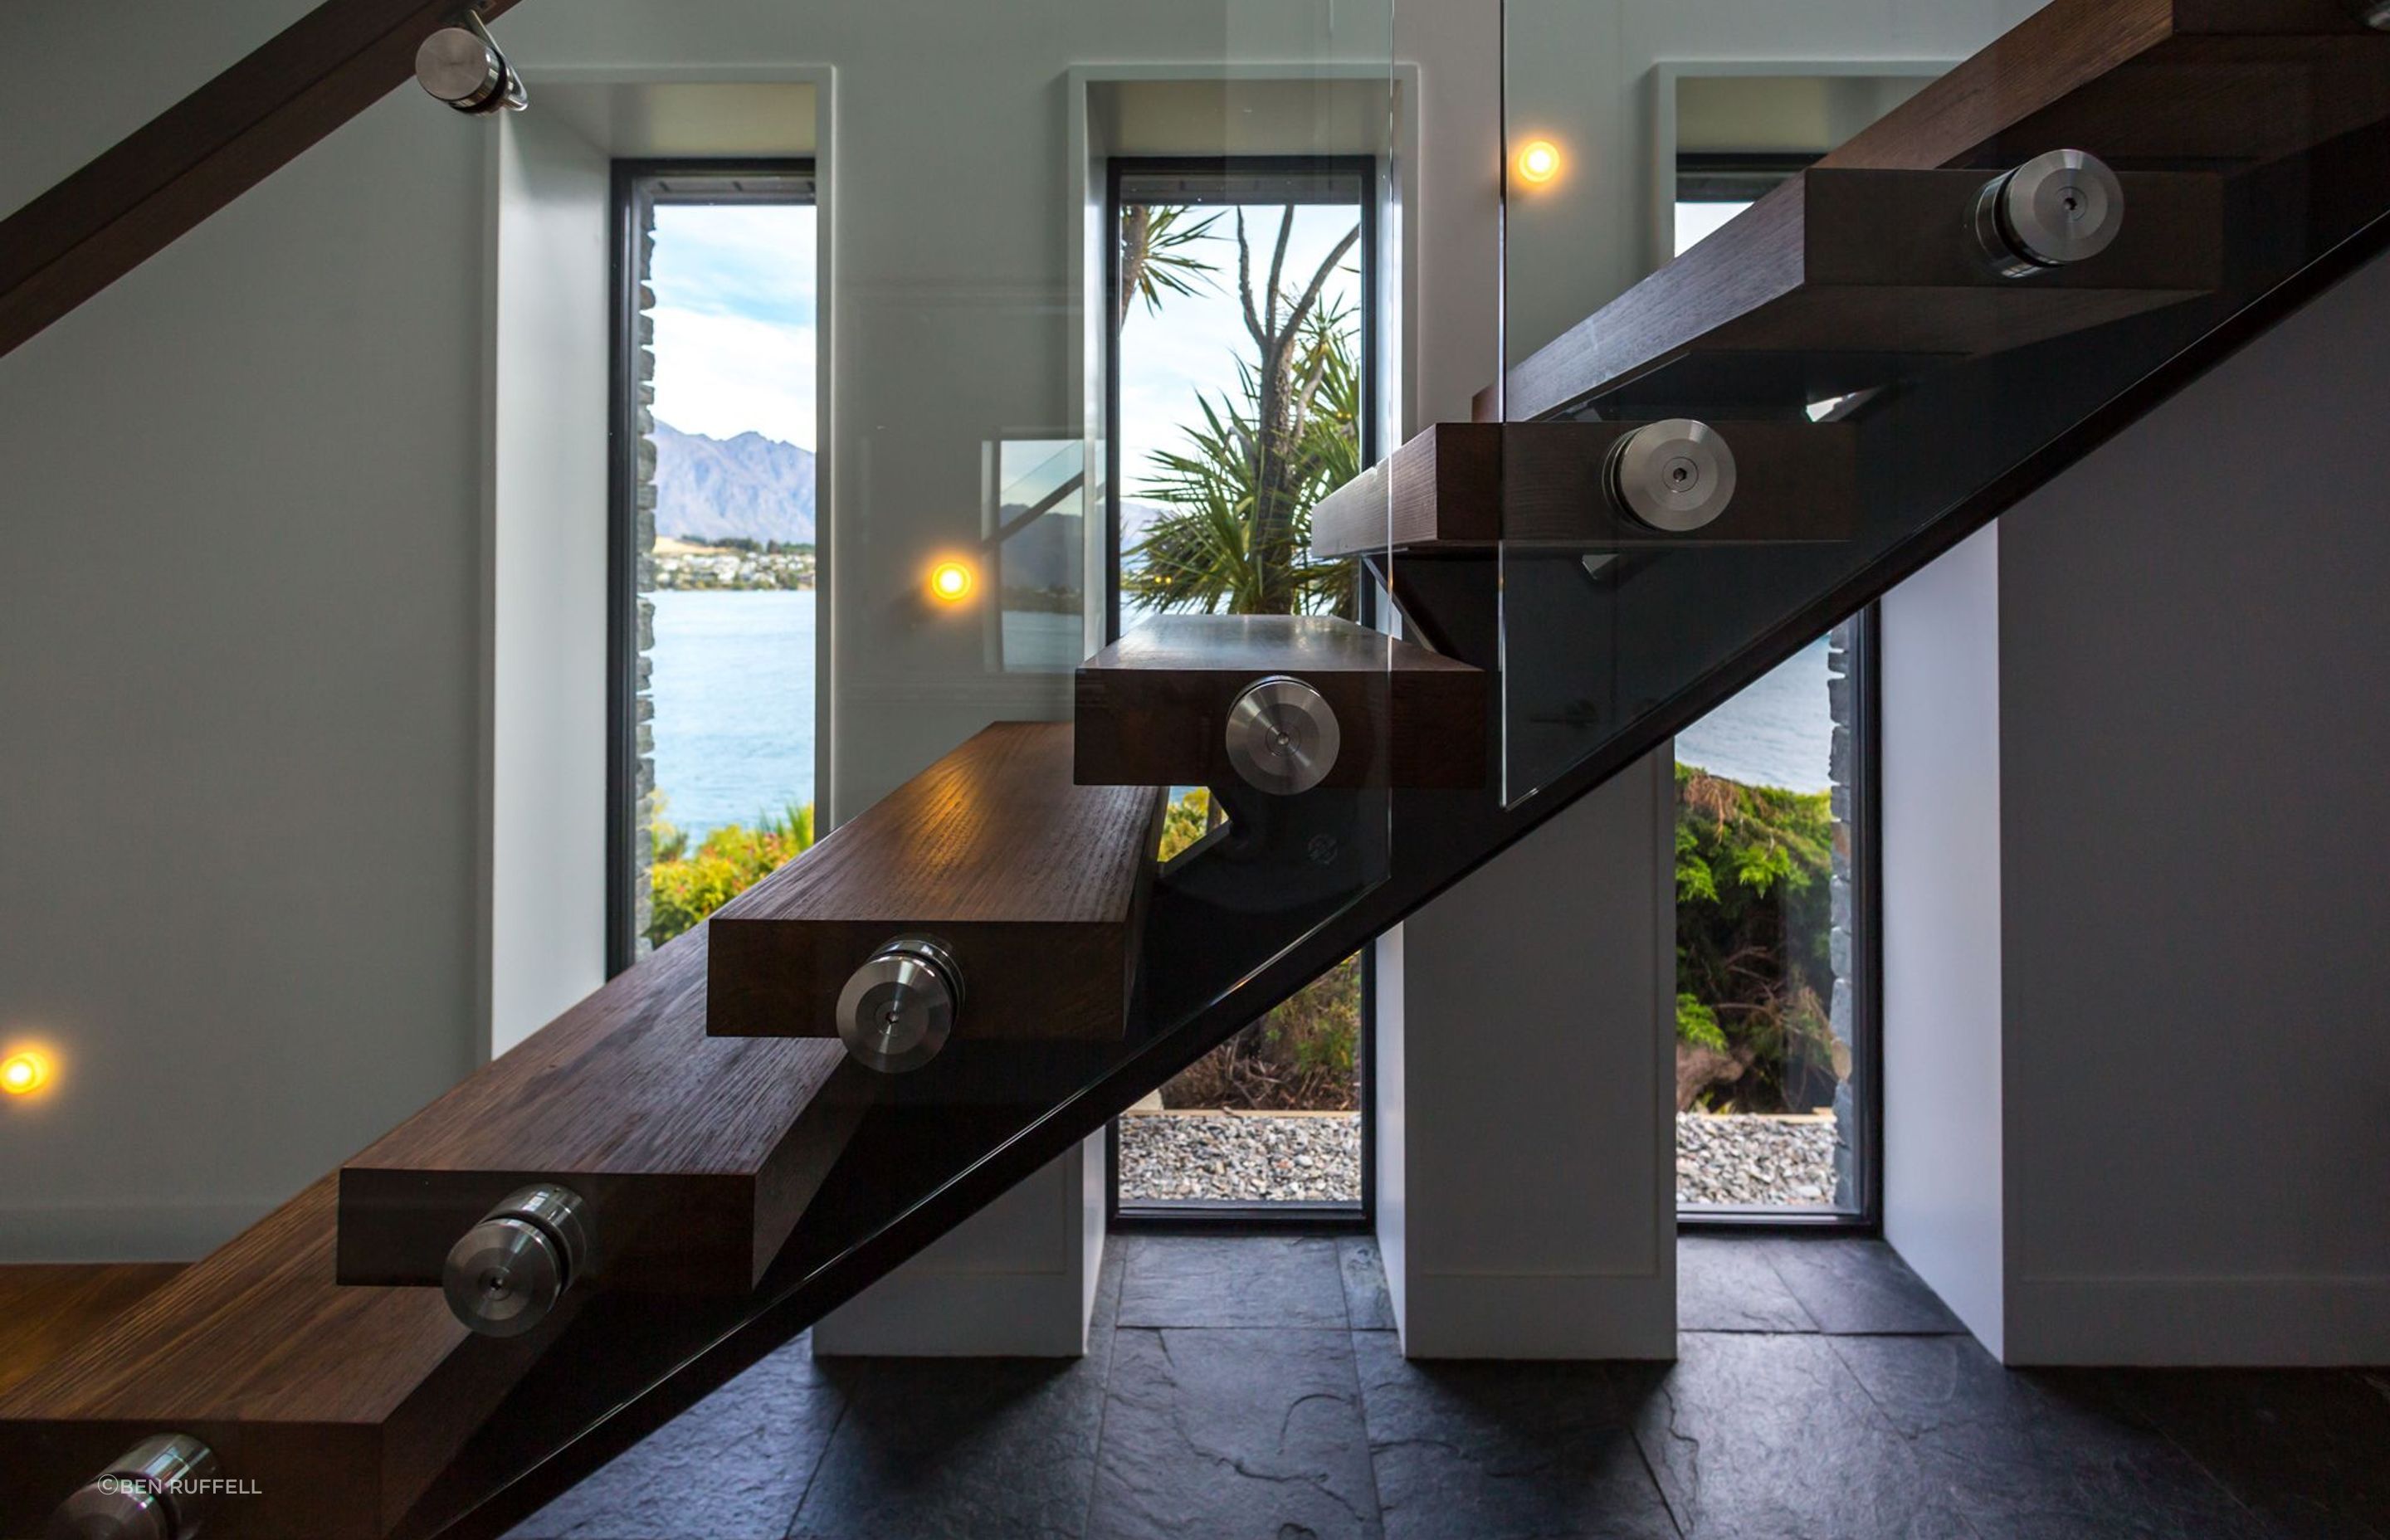 Deep recesses speak to the thermal capacity of the home while the floating timber staircase adds a dramatic flair to the entry.